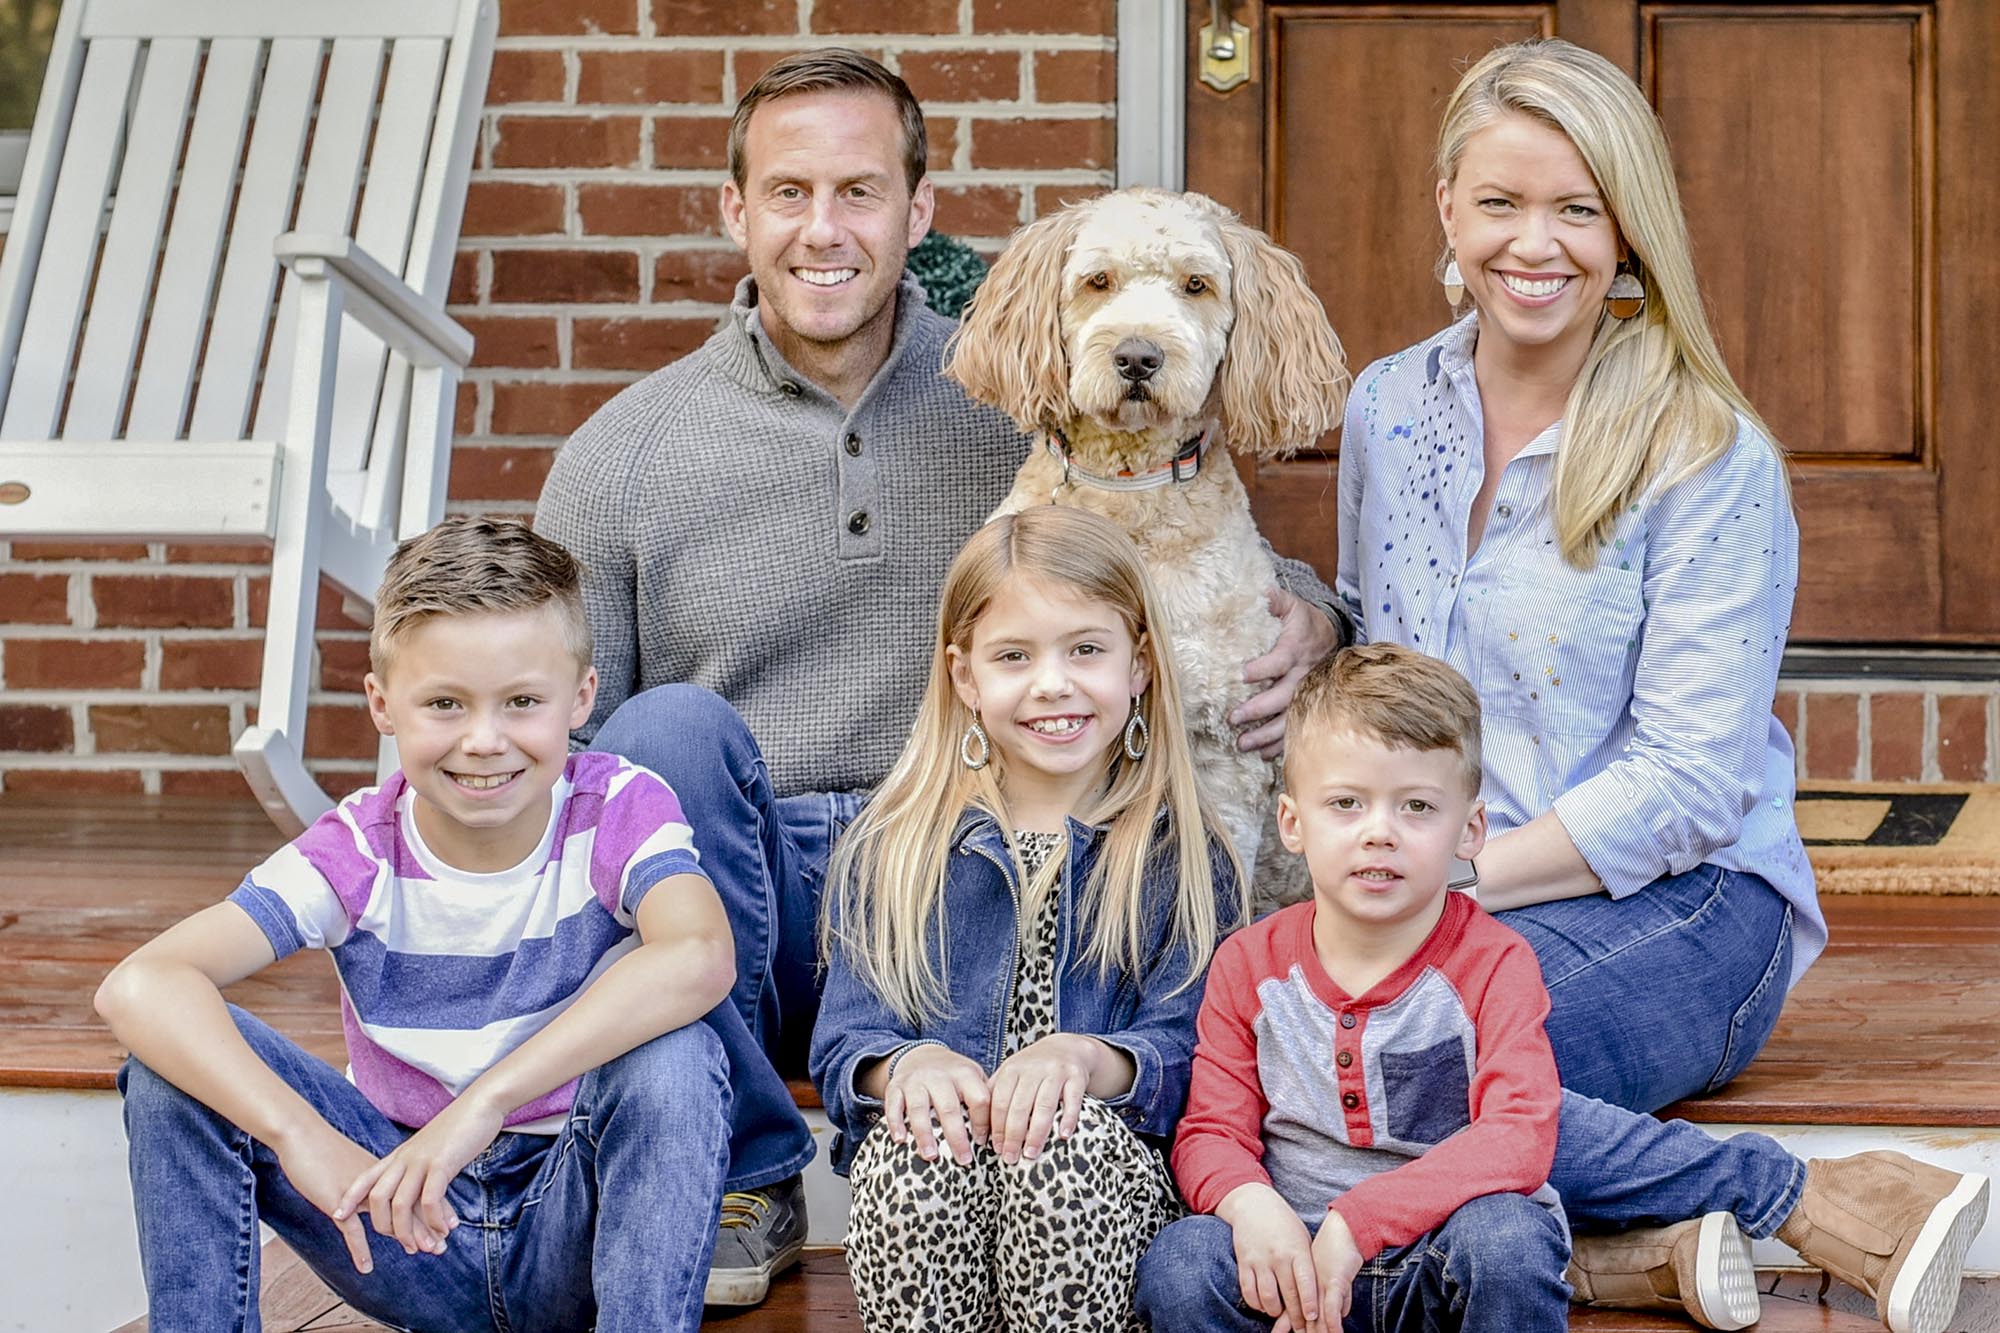 Matt and Colleen Chulis pose for a family photo with their three children, Luke, Adelle and Declan